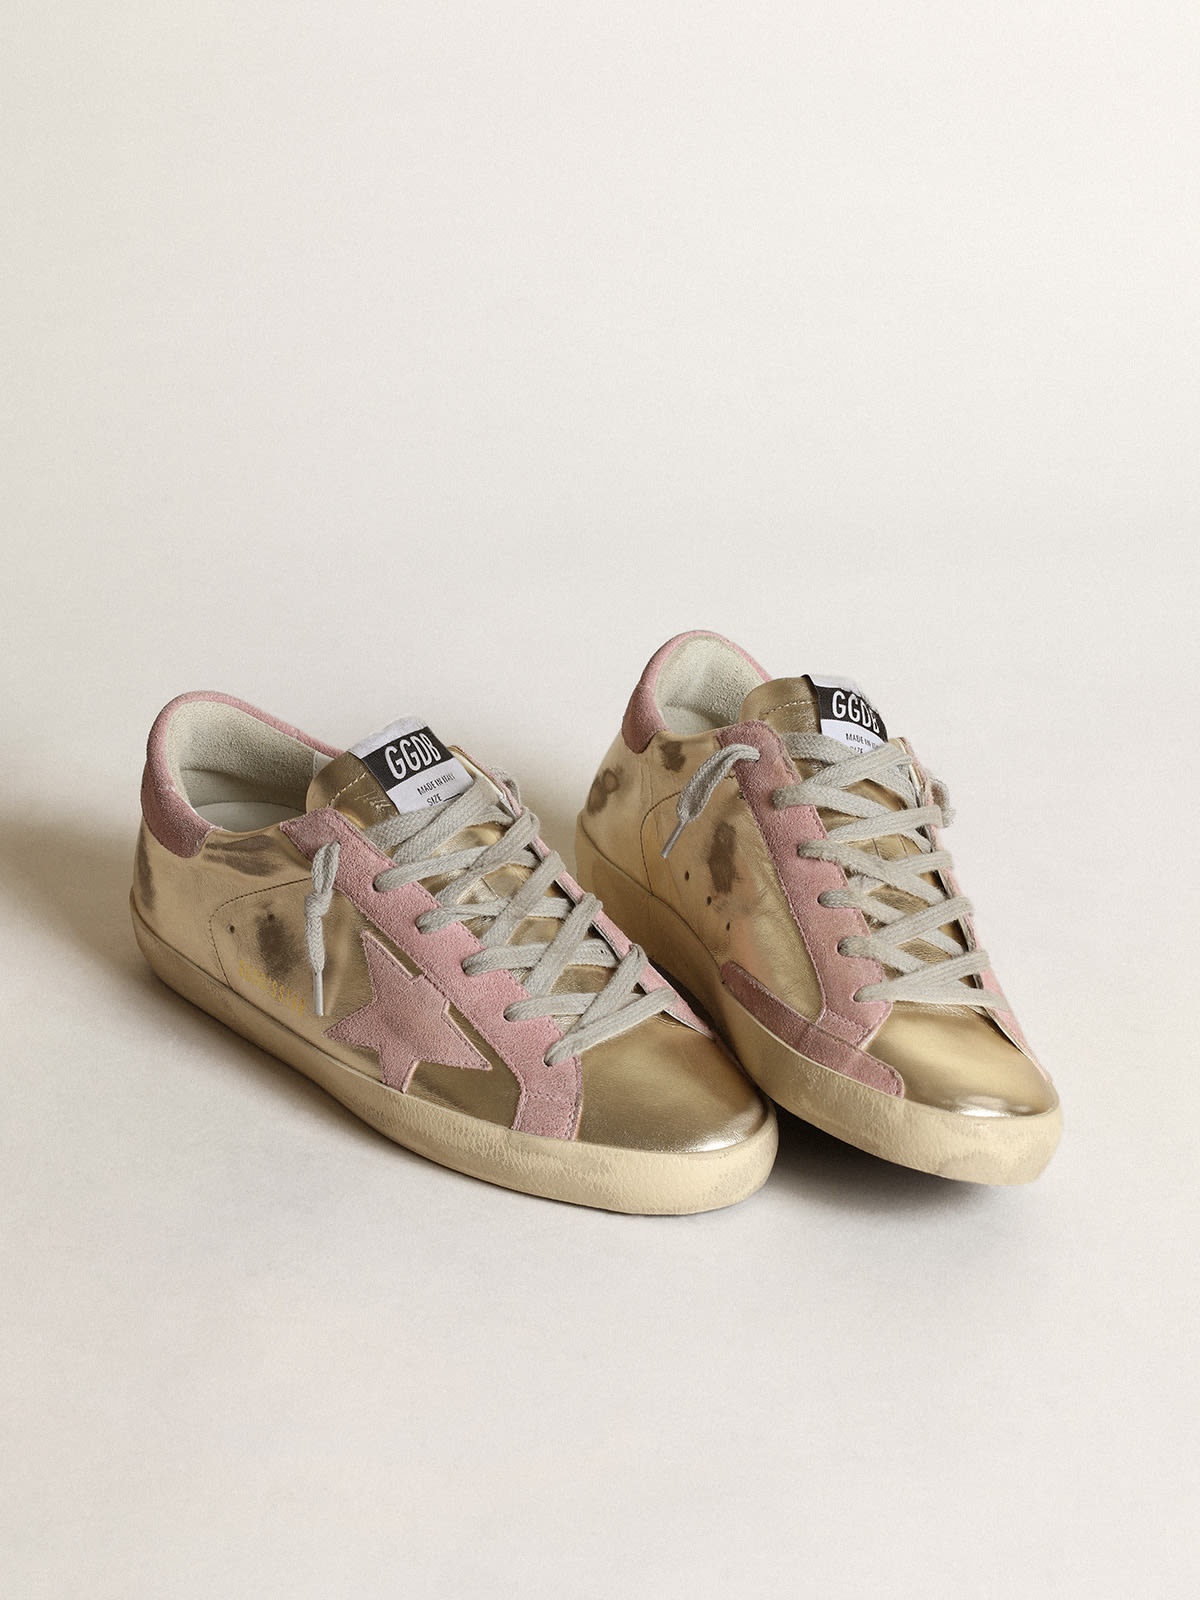 Super-Star LTD sneakers in platinum metallic leather with pink suede star and heel tab - 2